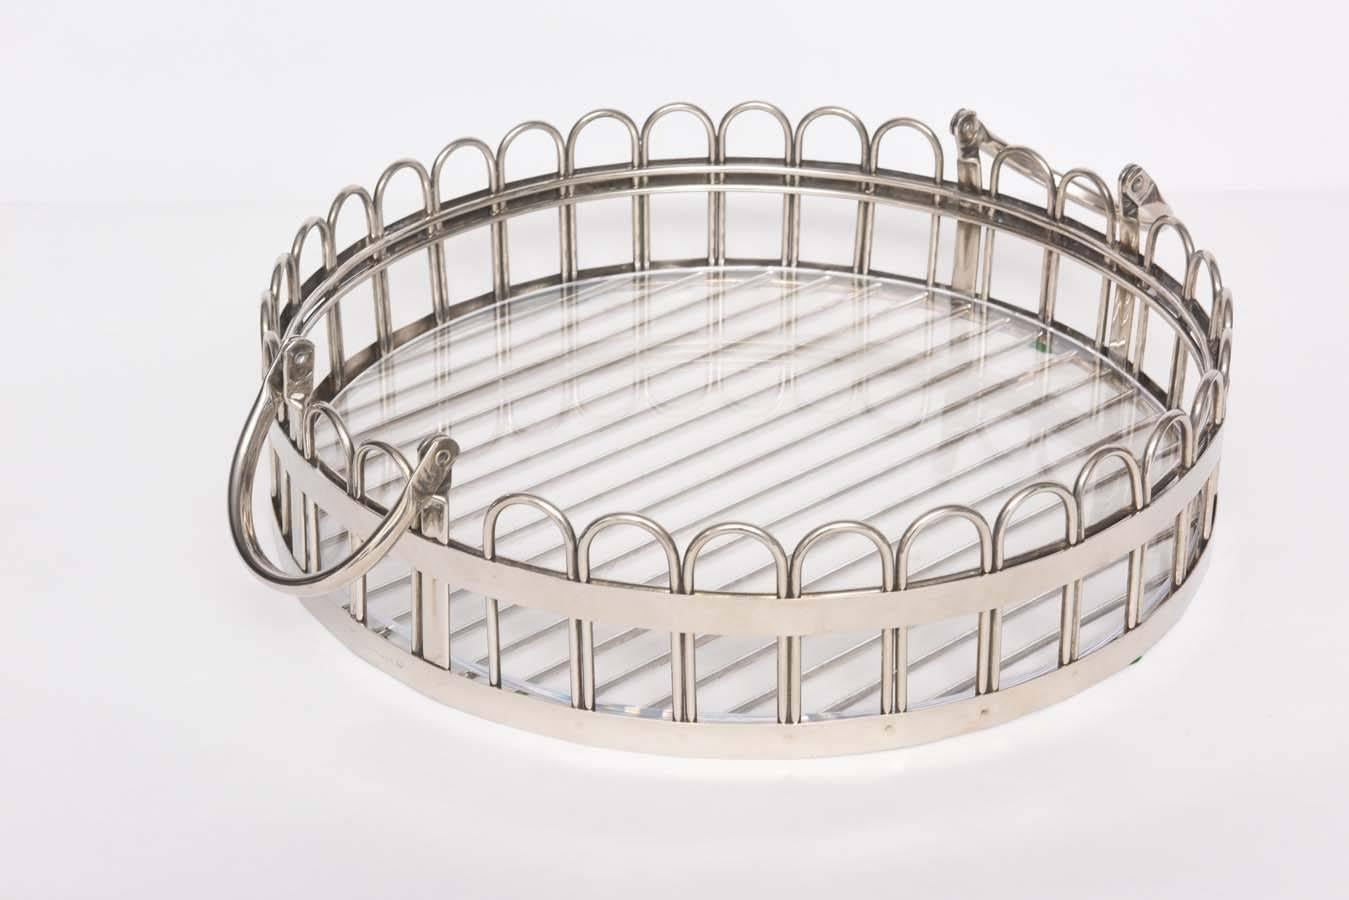 Godinger Silver-Plated Round Serving Tray with Lucite Inset, 20th Century 1